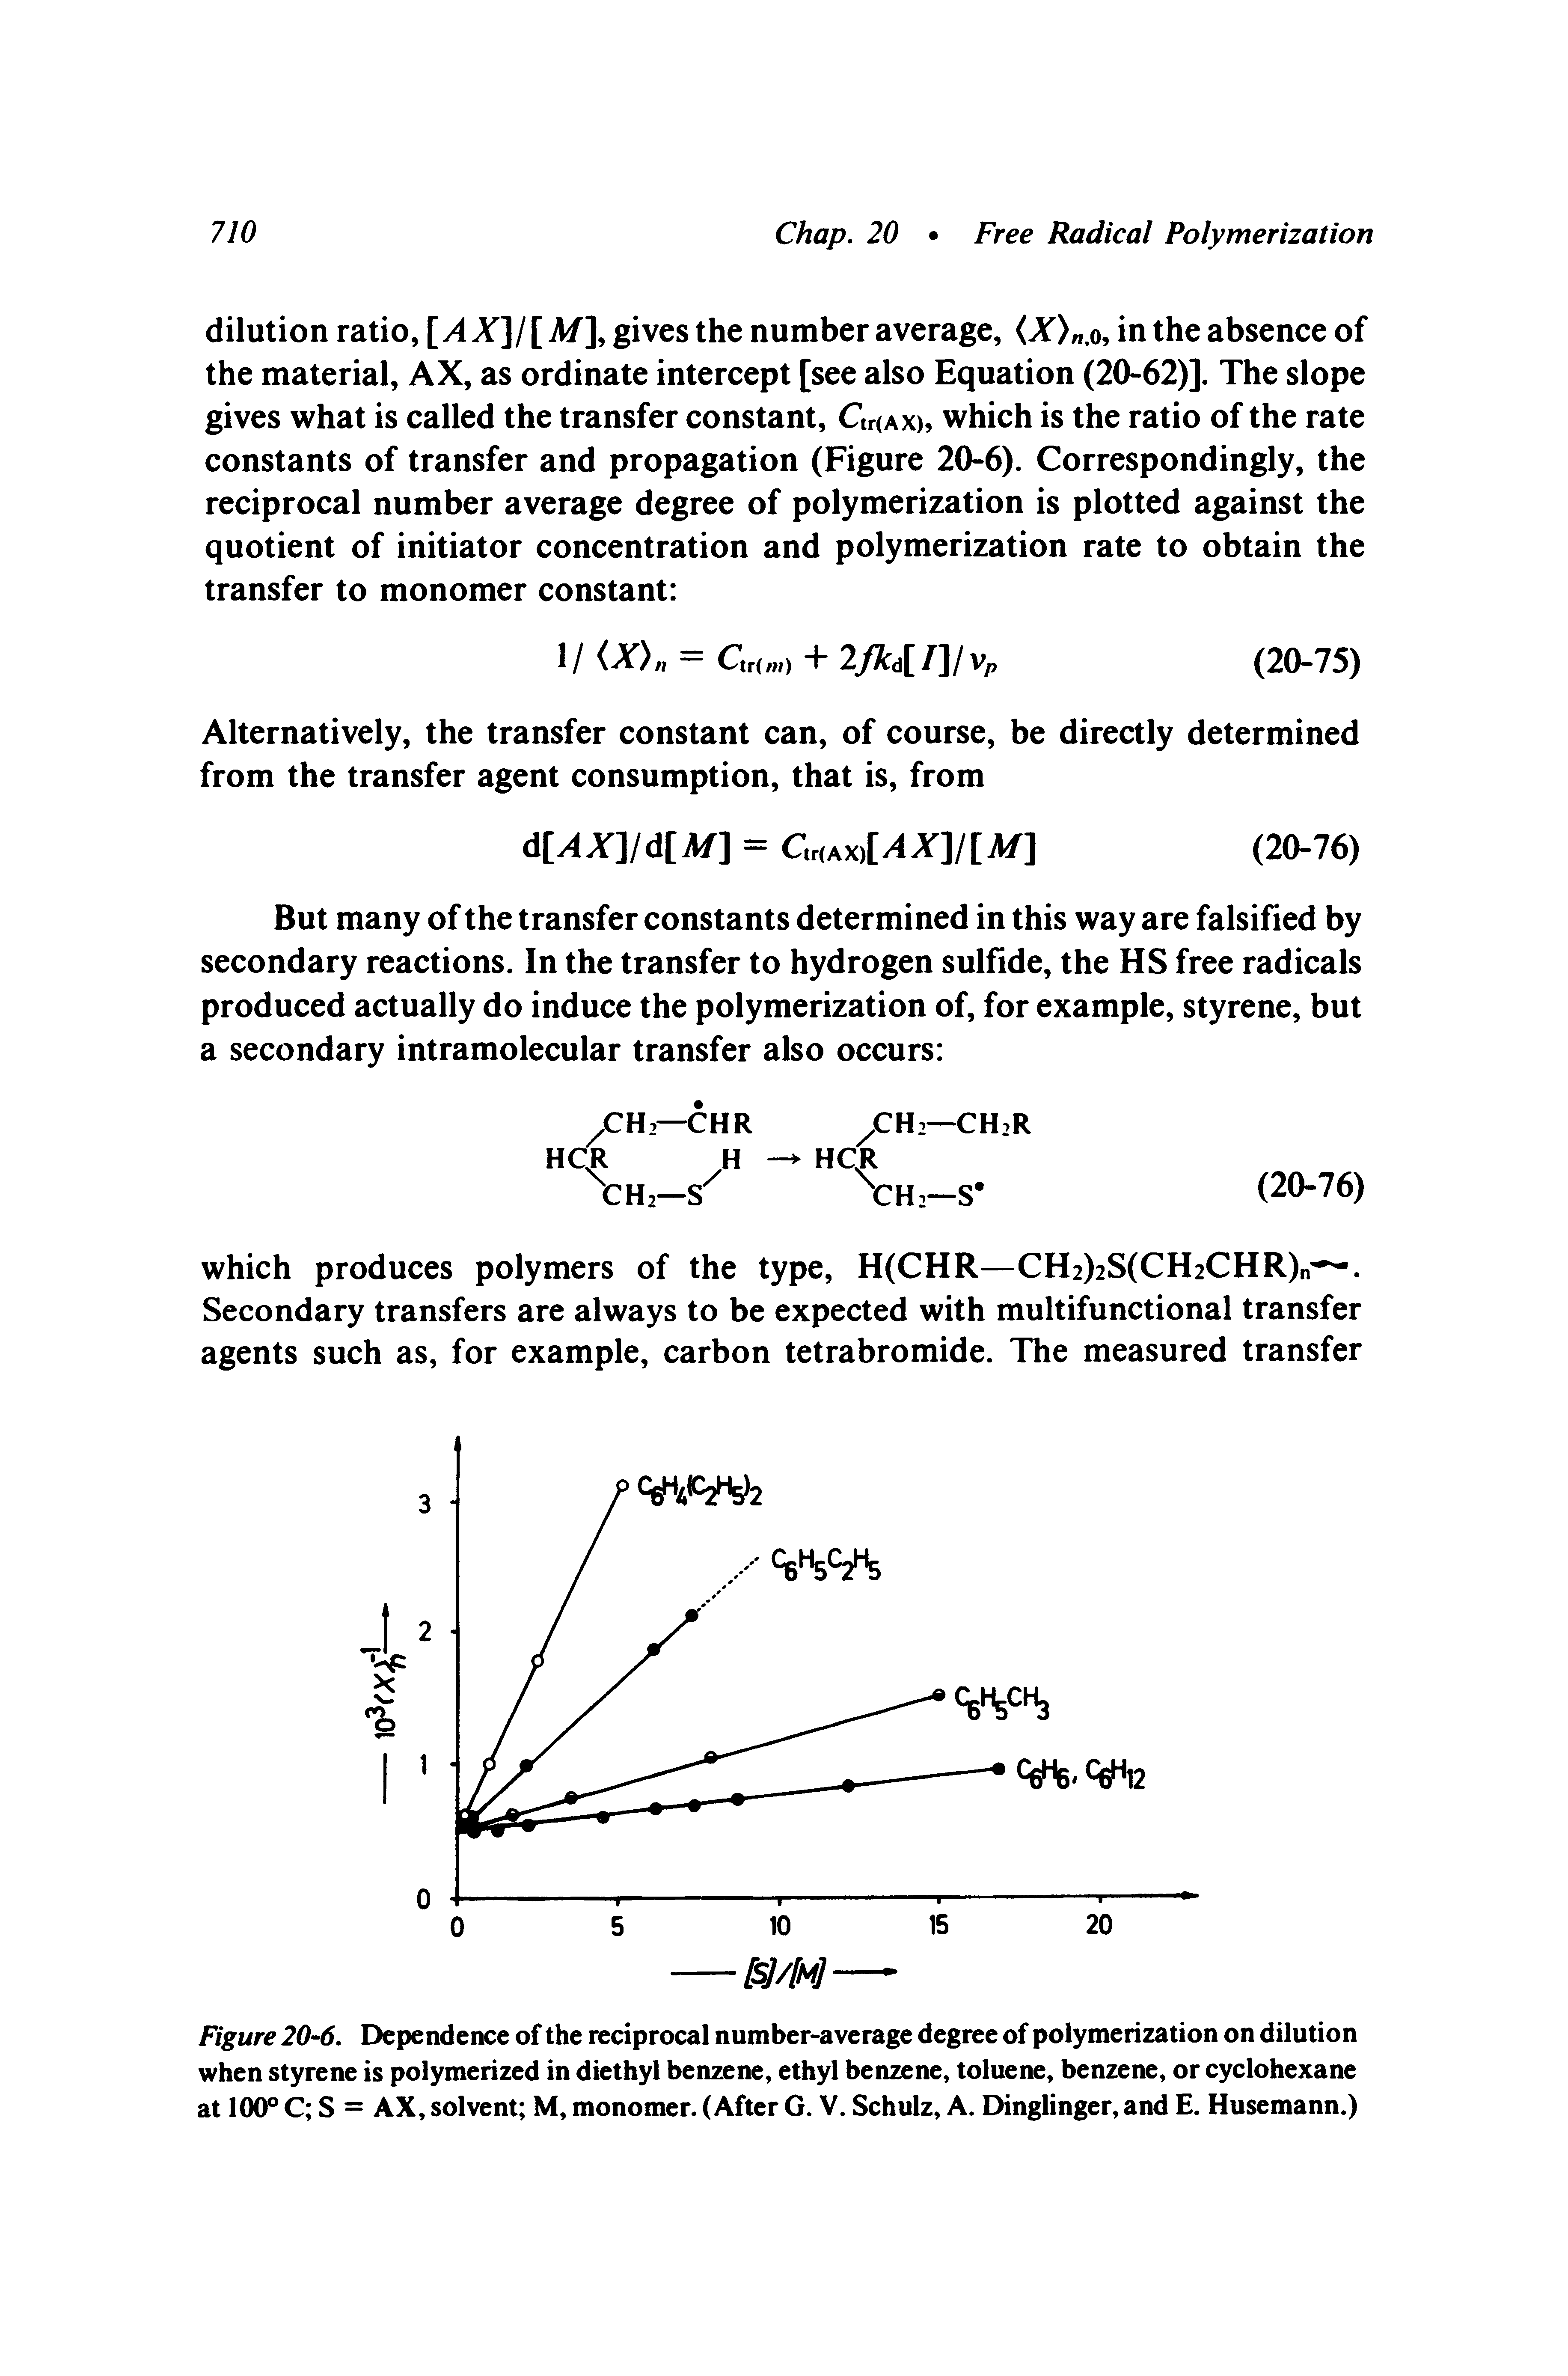 Figure 20-6. Dependence of the reciprocal number-average degree of polymerization on dilution when styrene is polymerized in diethyl benzene, ethyl benzene, toluene, benzene, or cyclohexane at 100° C S = AX, solvent M, monomer. (After G. V. Schulz, A. Dinglinger, and E. Husemann.)...